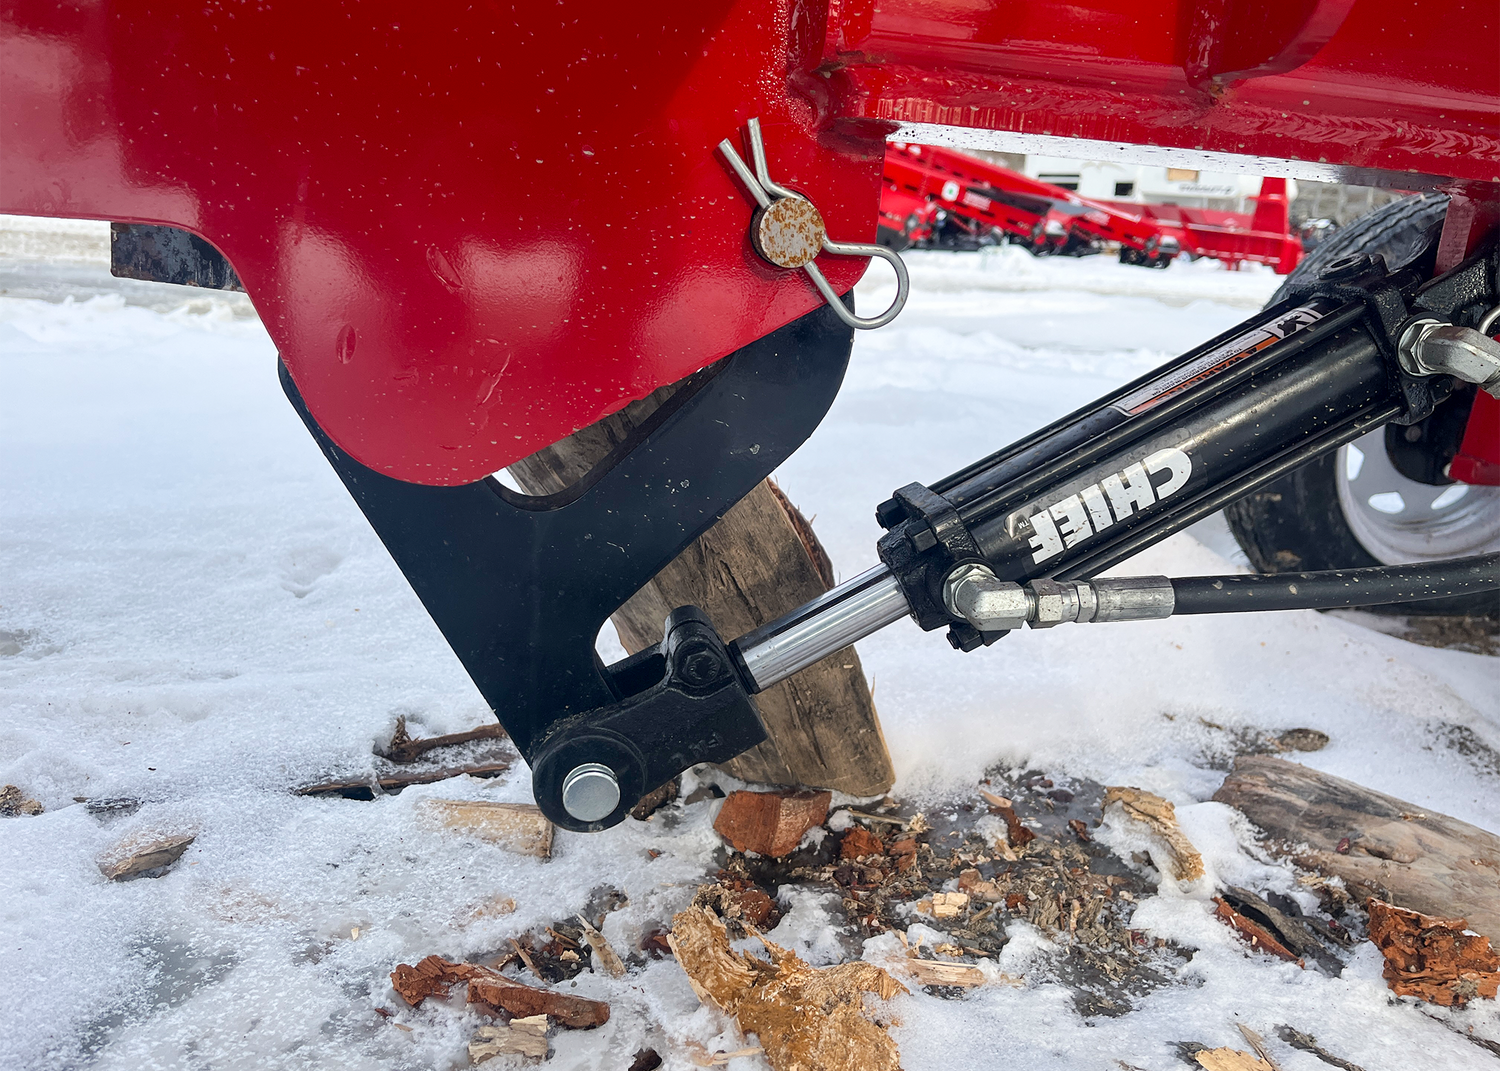 PTO log splitter with hydraulic wedge lift